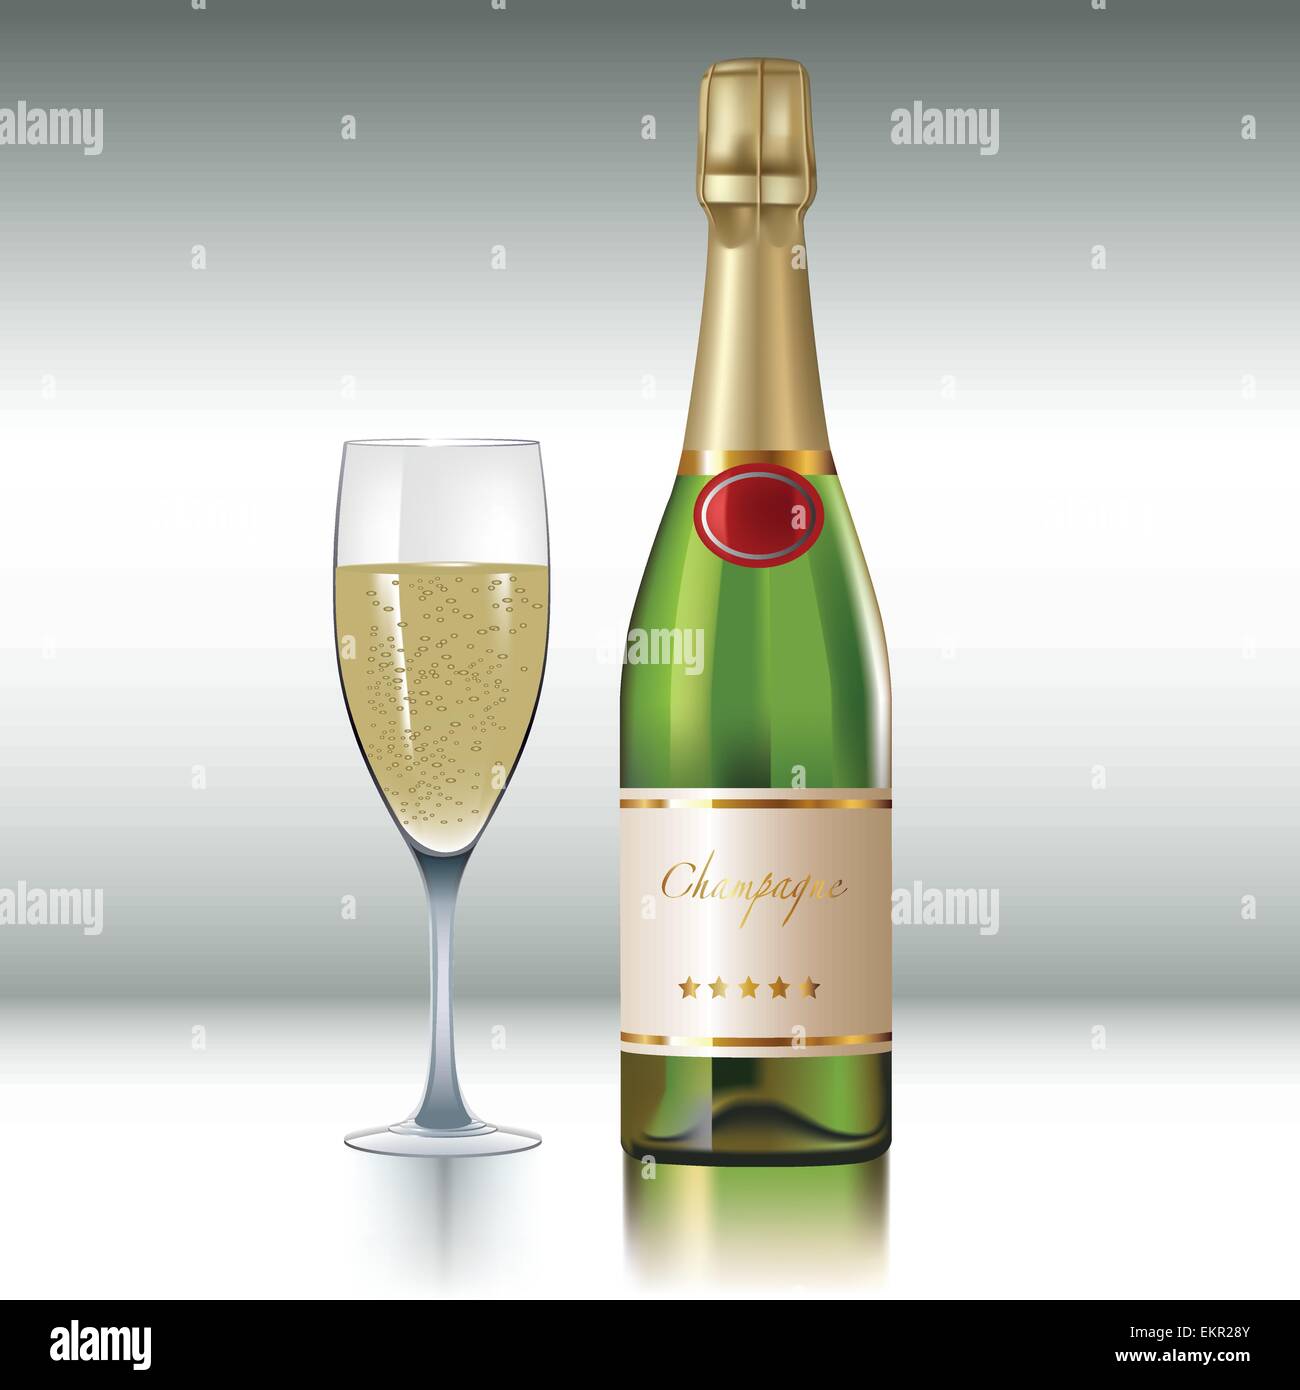 Champagne and full champagne glass. Vector illustration Stock Vector